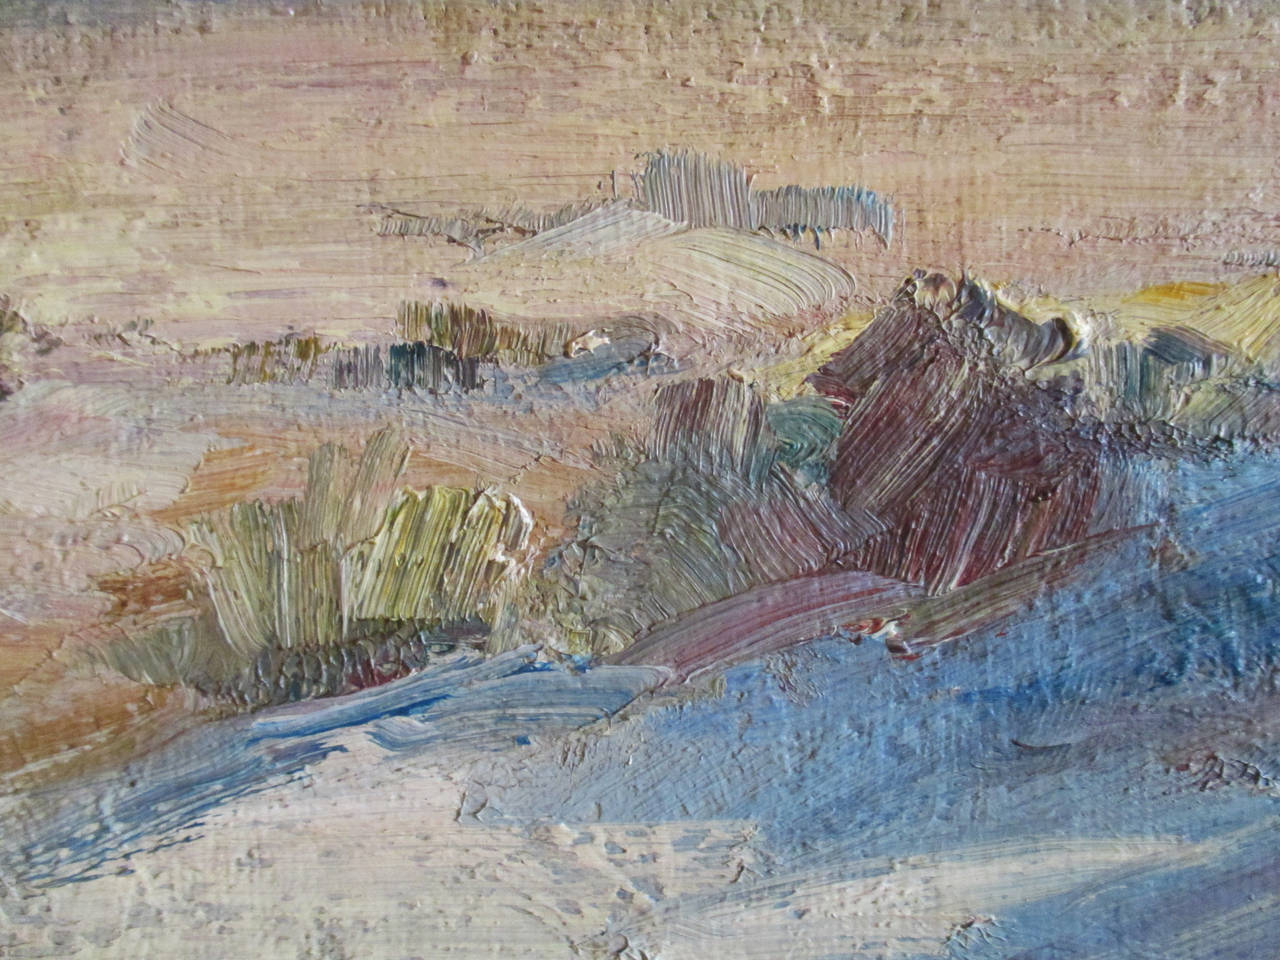 Jean Mannheim Plein Aire Painting, California Mountains In Excellent Condition For Sale In Ajijic, Jalisco